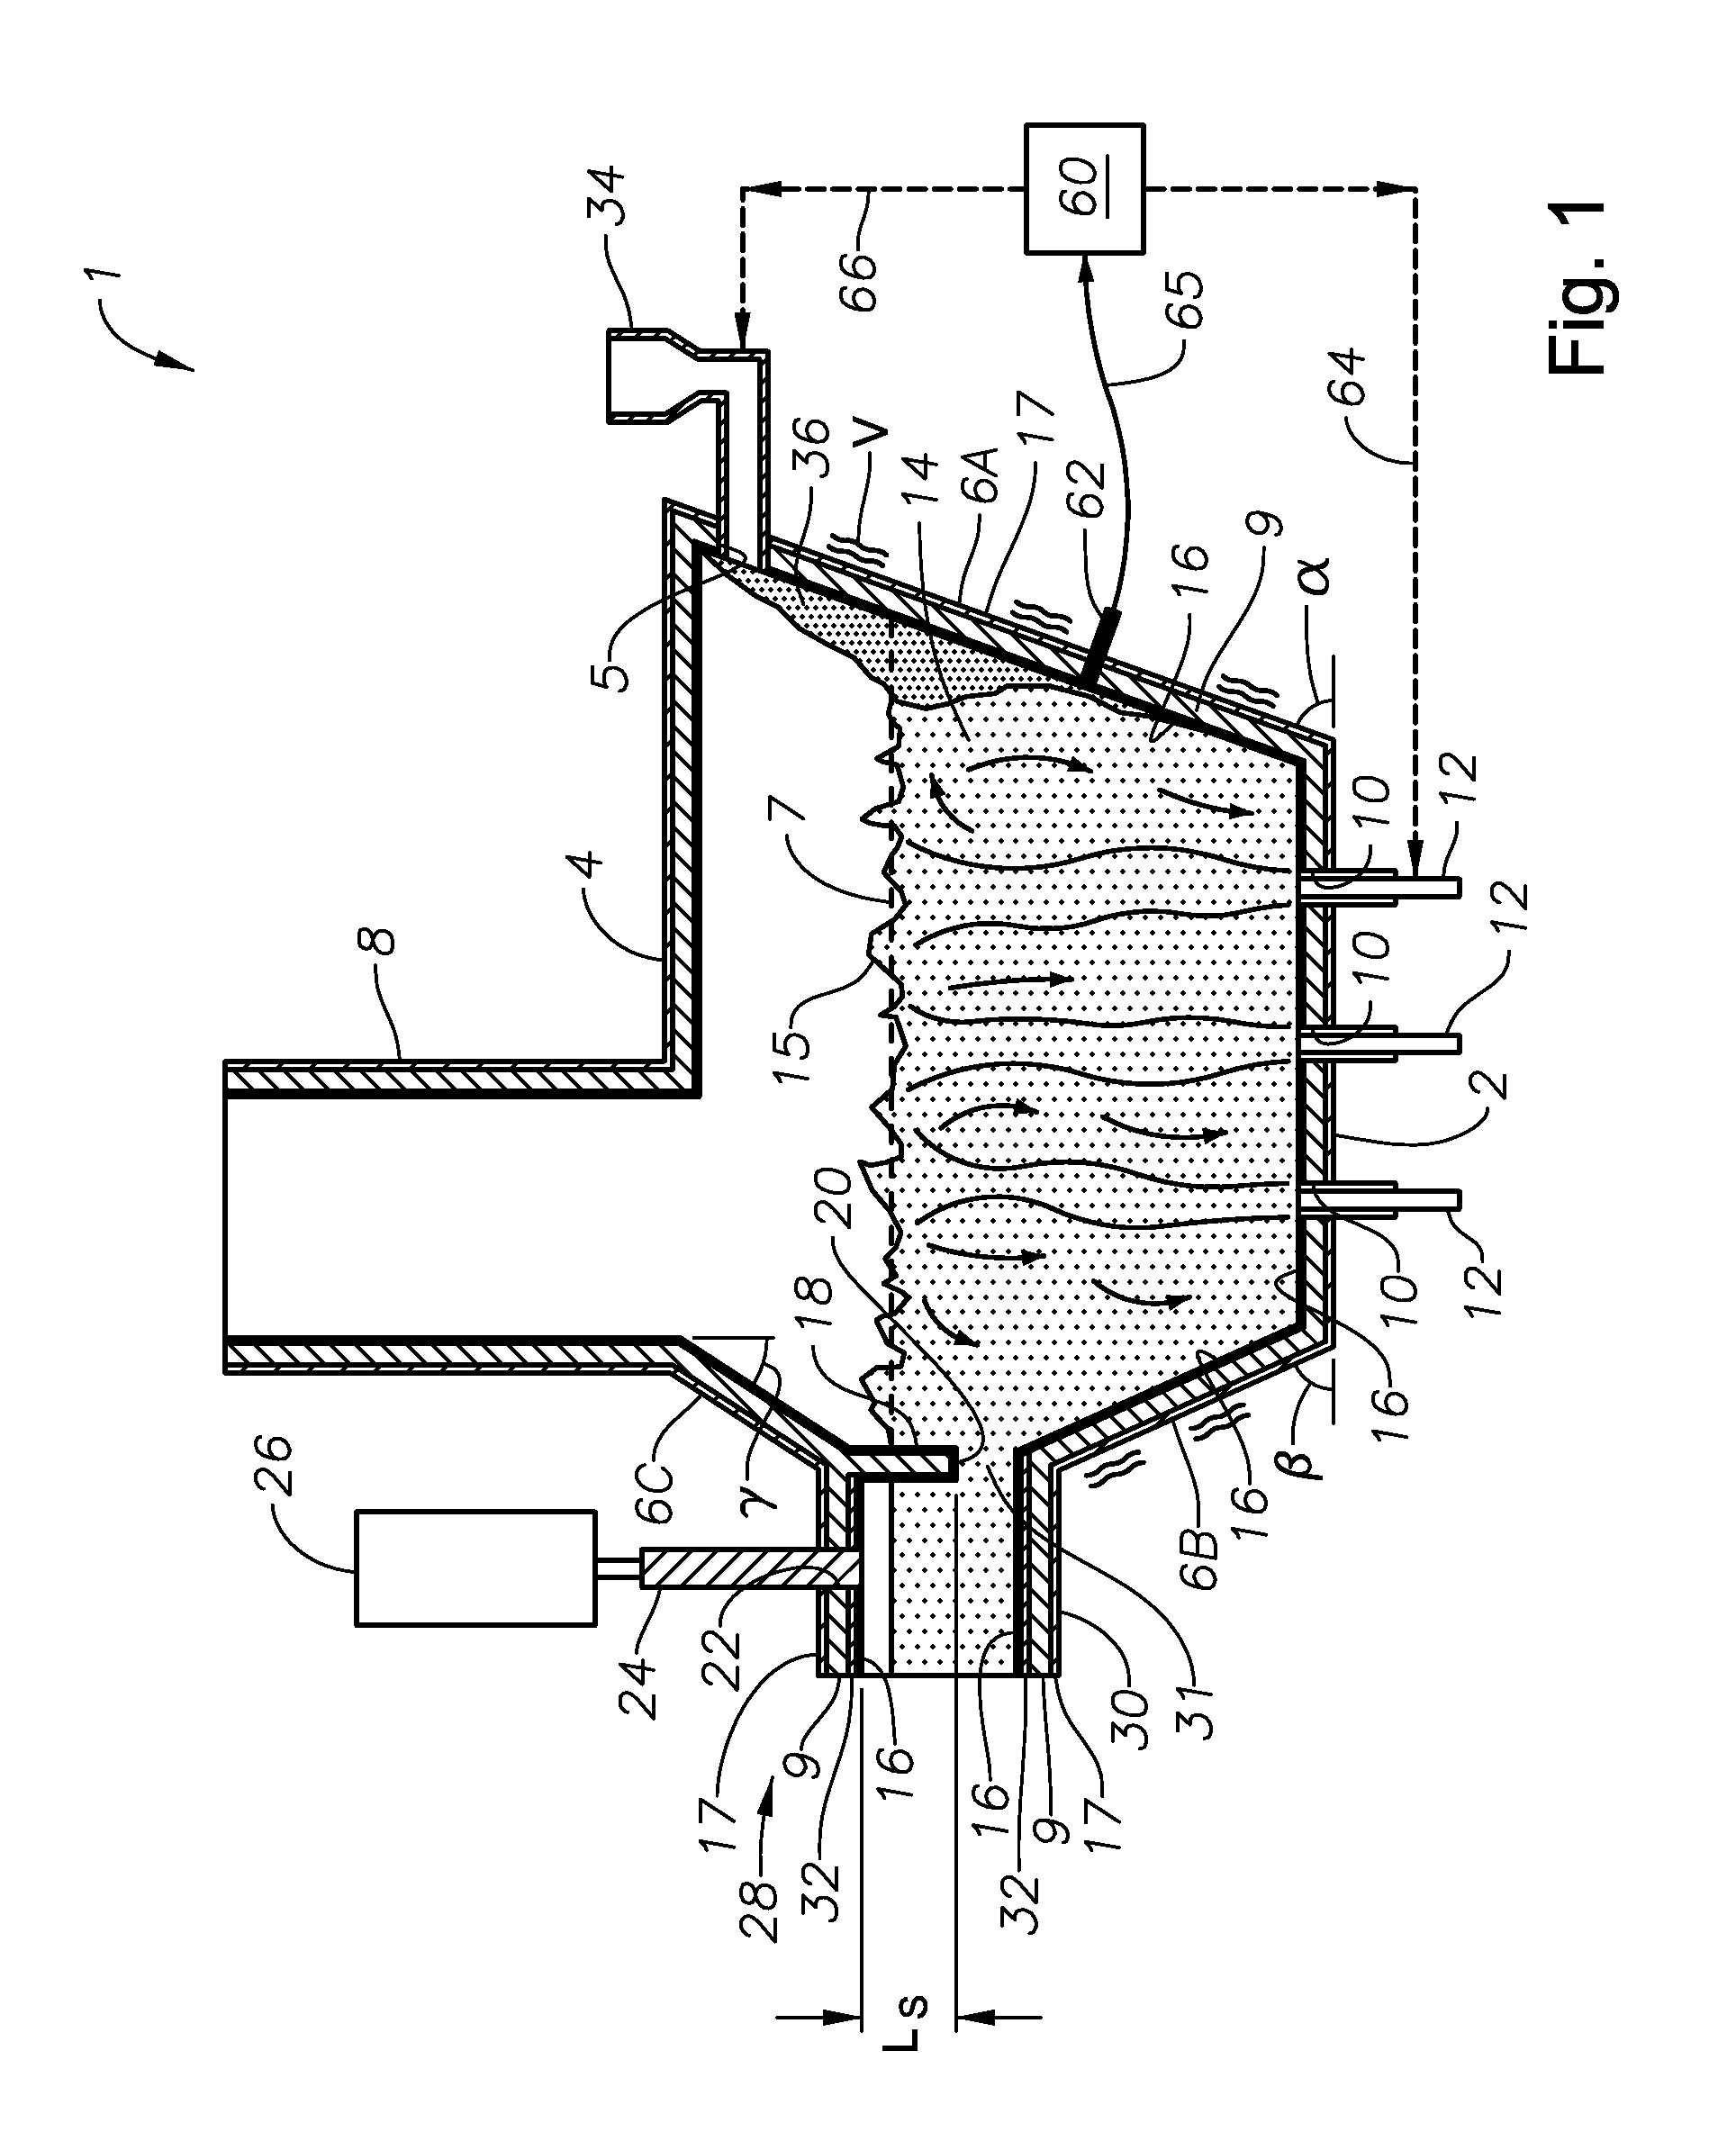 Submerged combustion melting processes for producing glass and similar materials, and systems for carrying out such processes